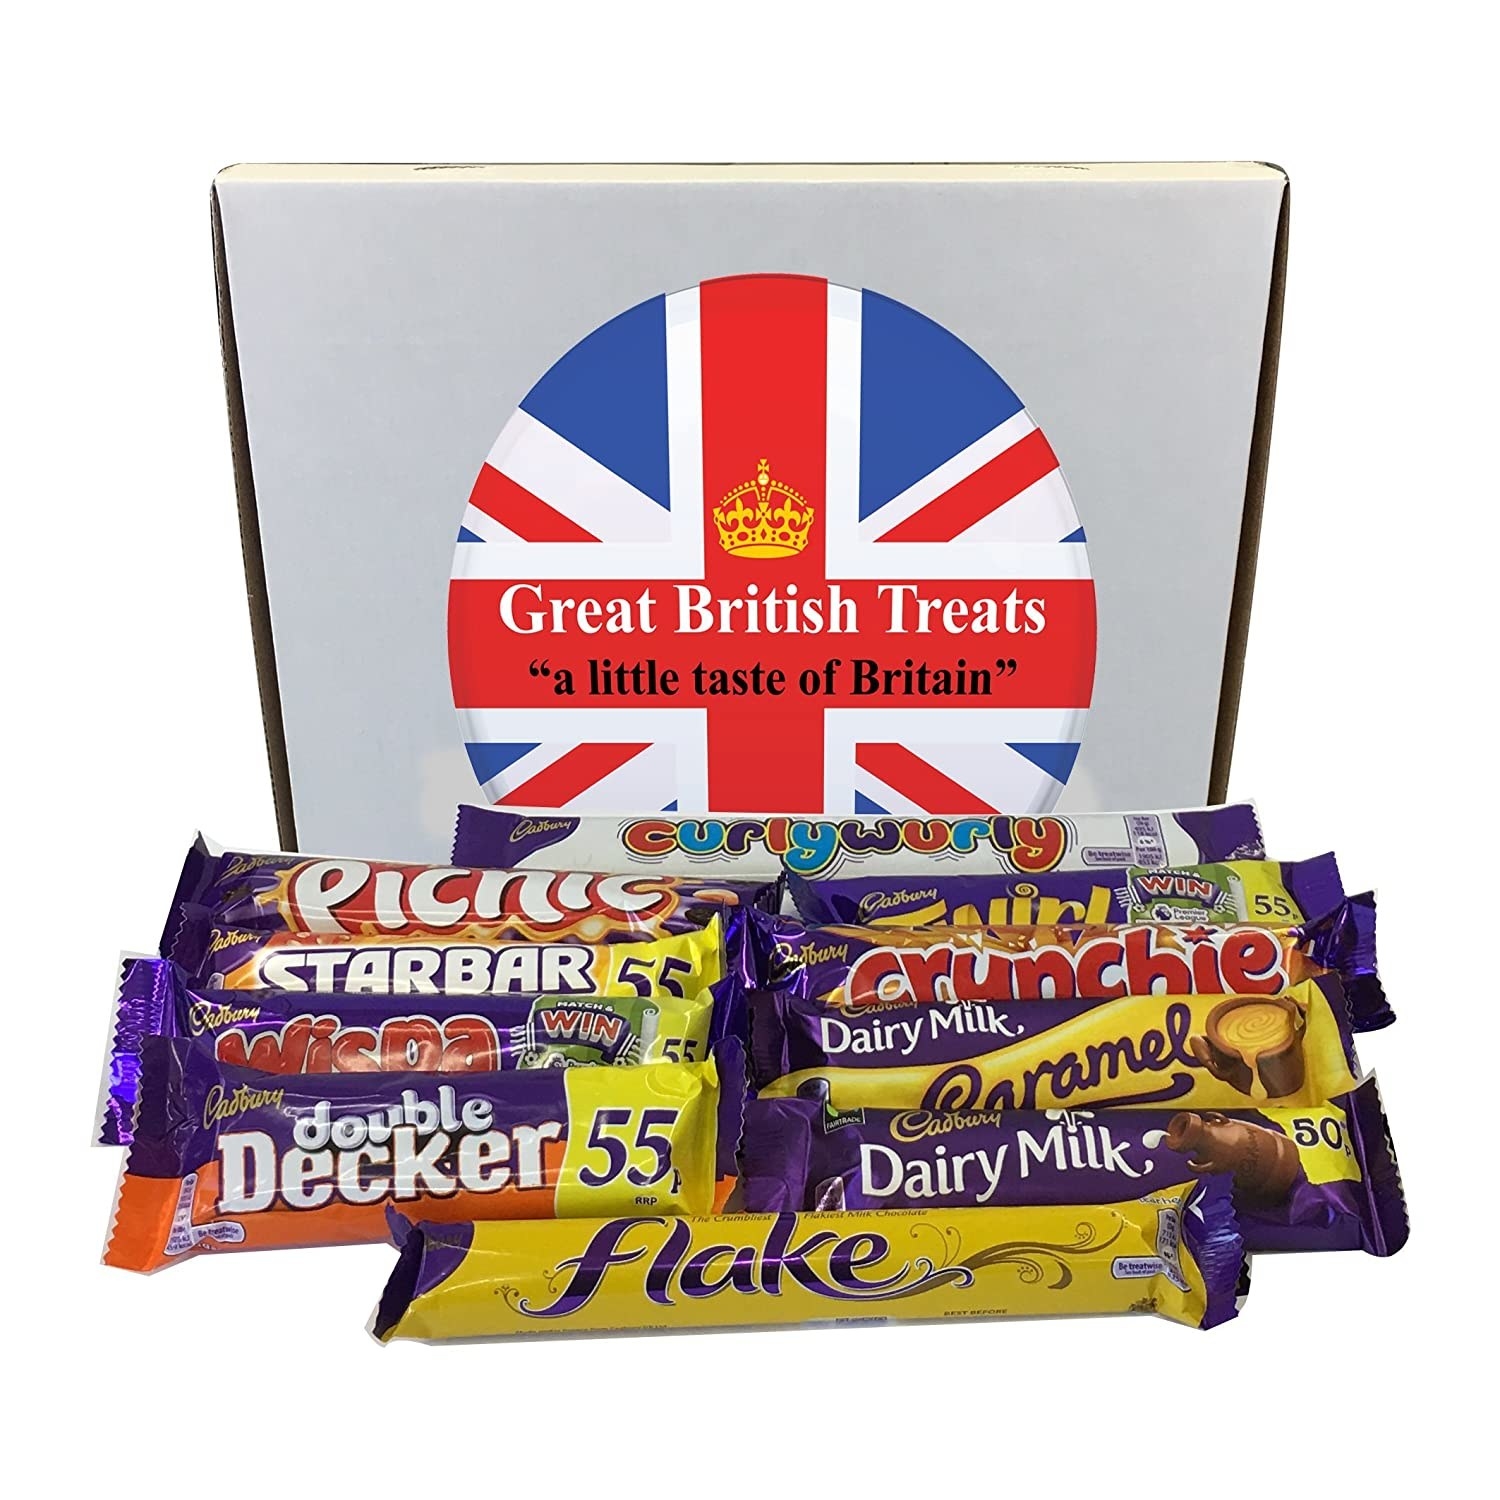 A box that says &quot;Great British Treats&quot; along with full-sized Cadbury chocolate bars in a variety of flavors 